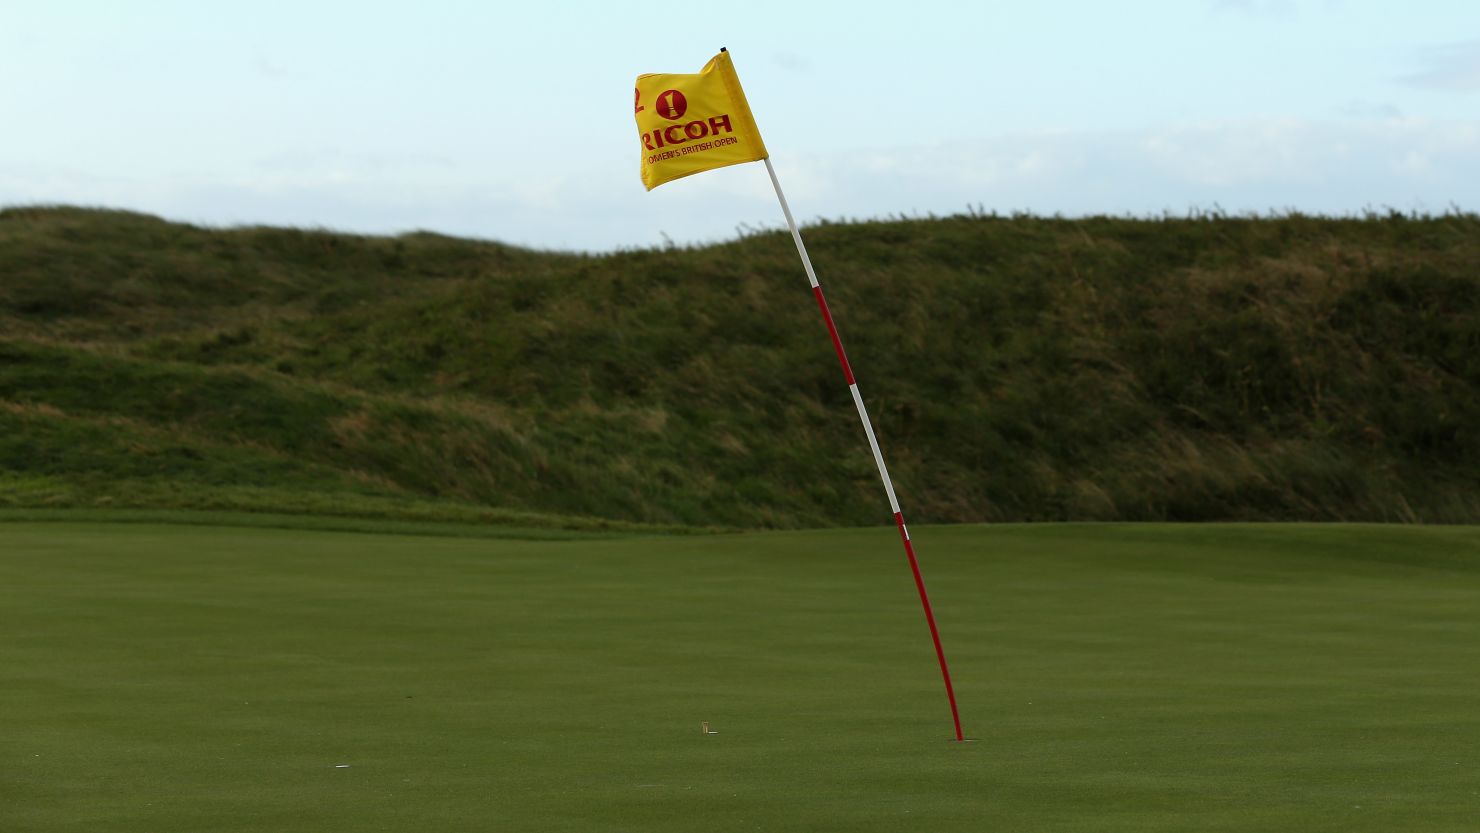 The wind blew hard on day two of the Women's British Open at Hoylake, forcing officials to abandon play